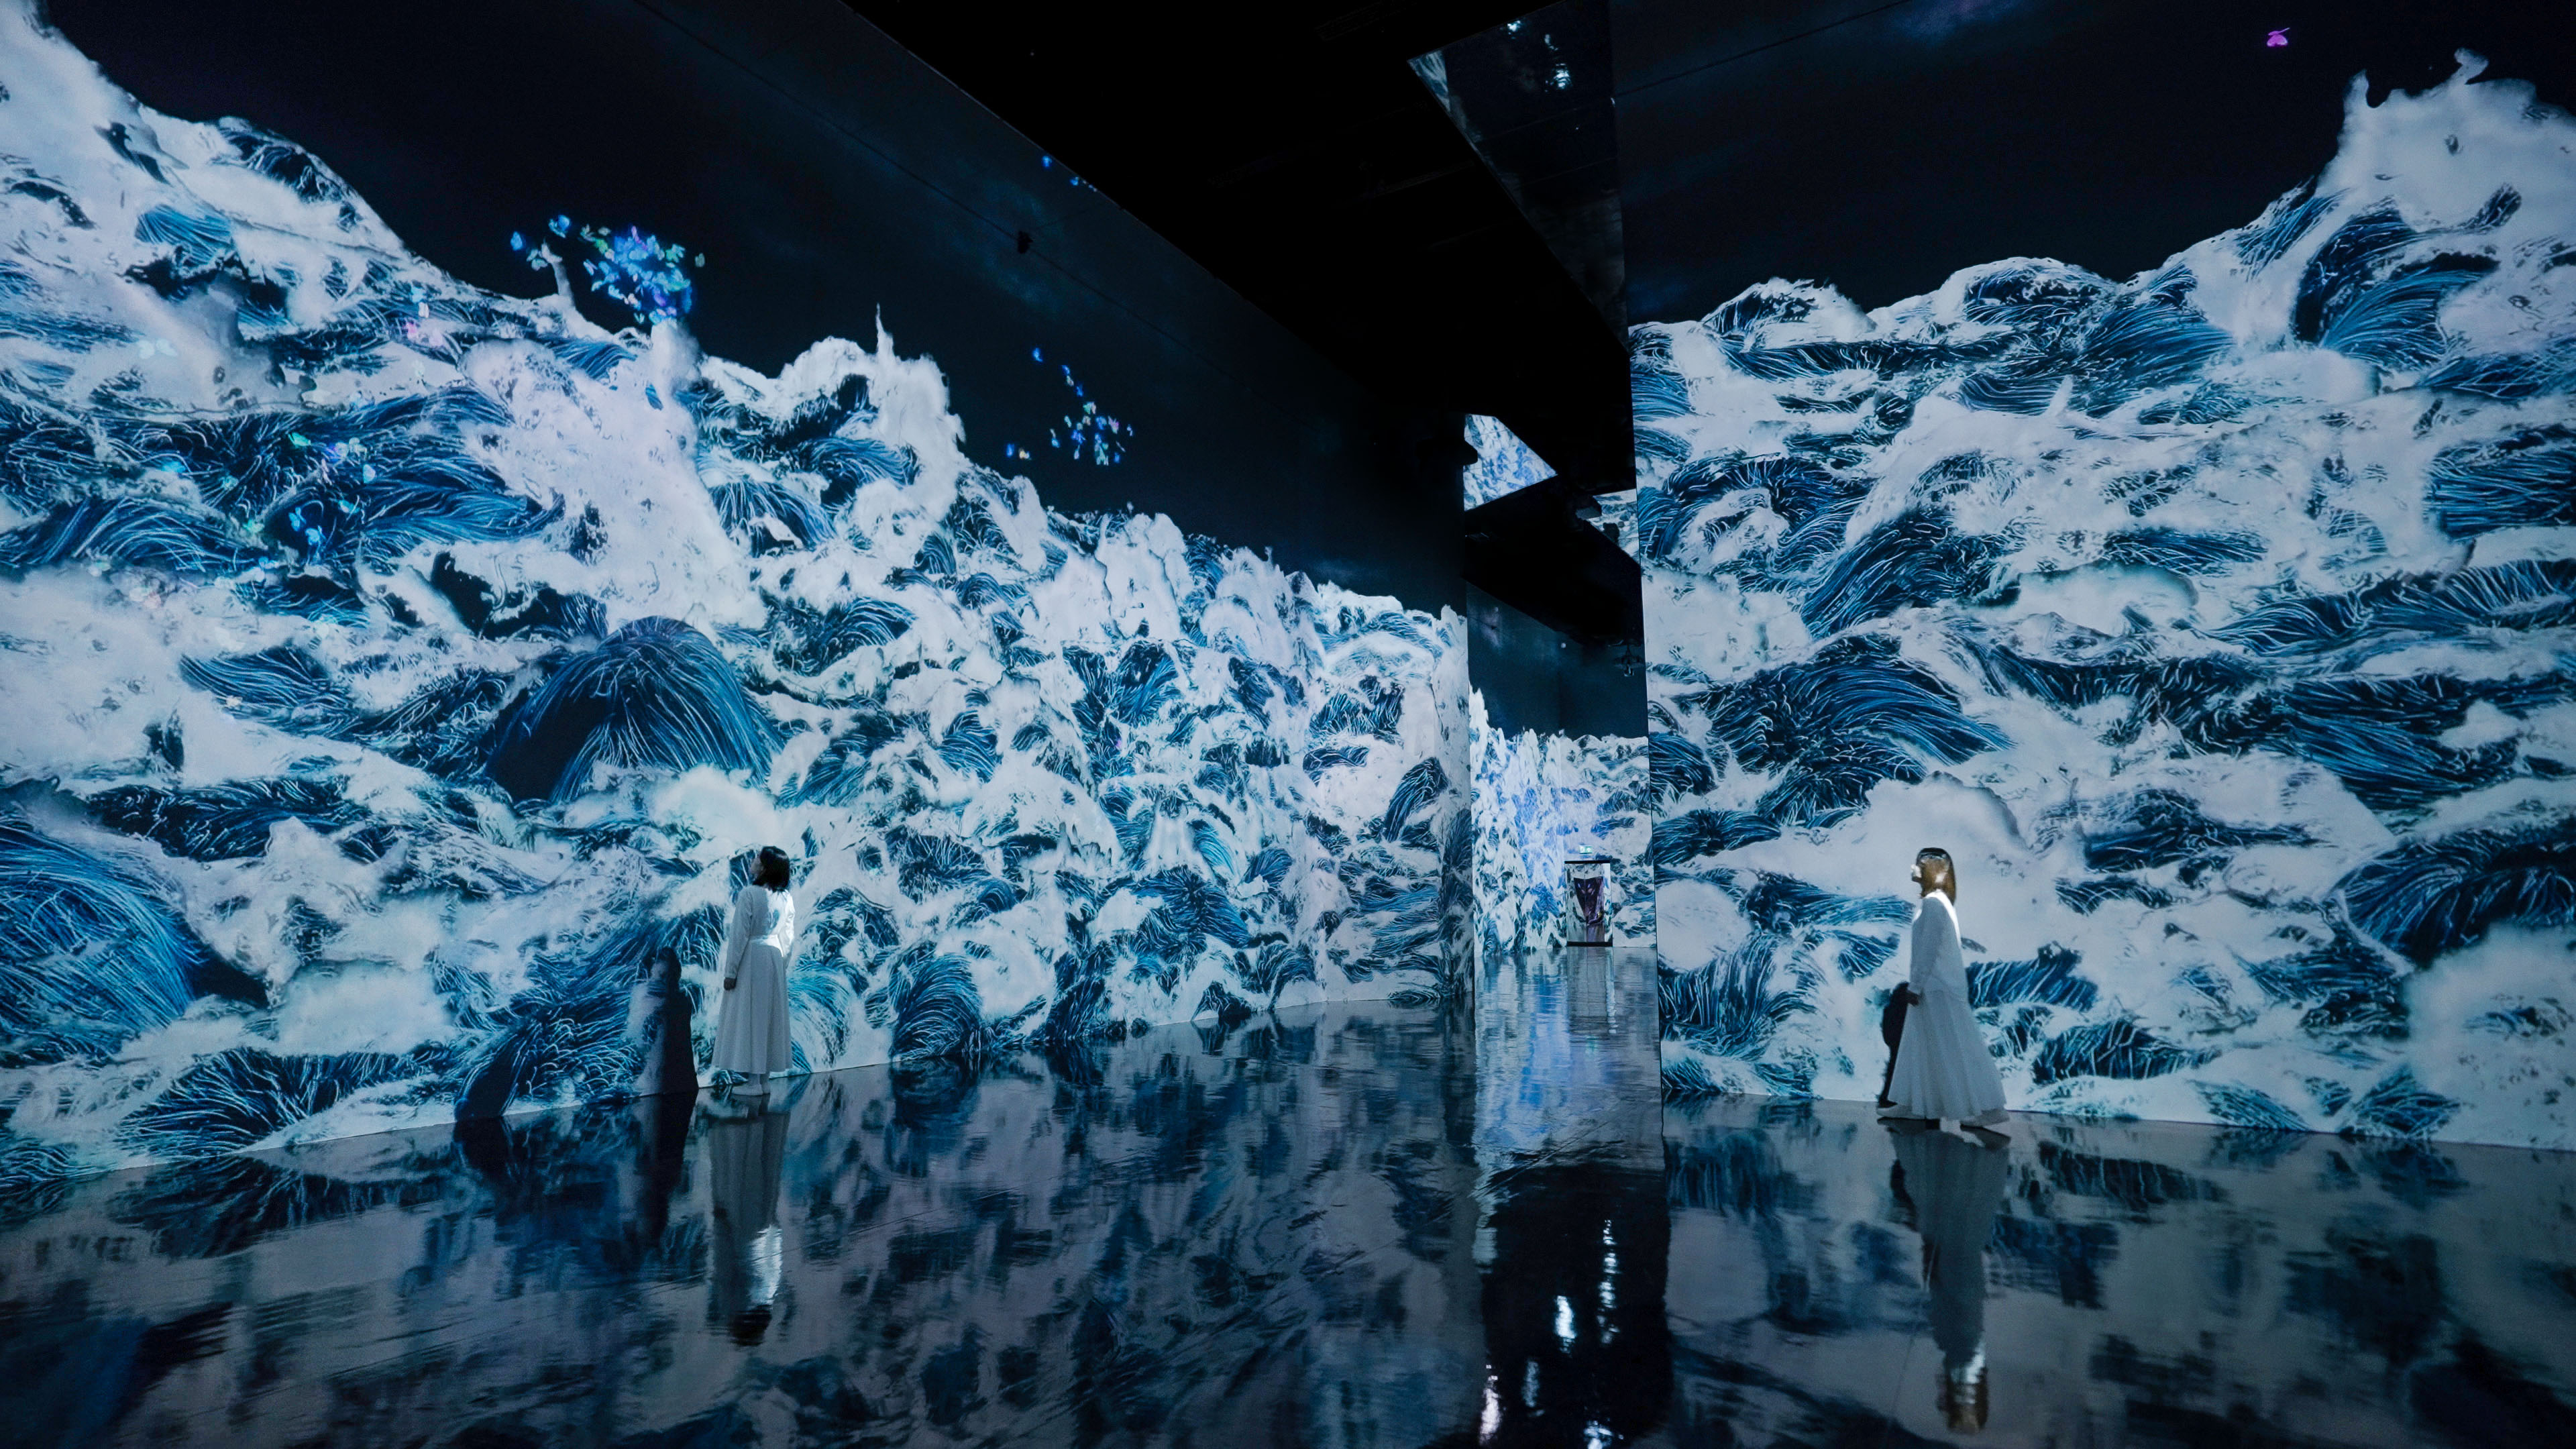 The artwork appears rising, filling the space. The work has no beginning or end, and is made up of one continuous wave that is all connected. The waves gradually shift, transcending boundaries and flowing into other rooms. On view at teamLab Borderless in Historic Jeddah. (teamLab, Black Waves: Flowing Beyond Borders / Video: teamLab)